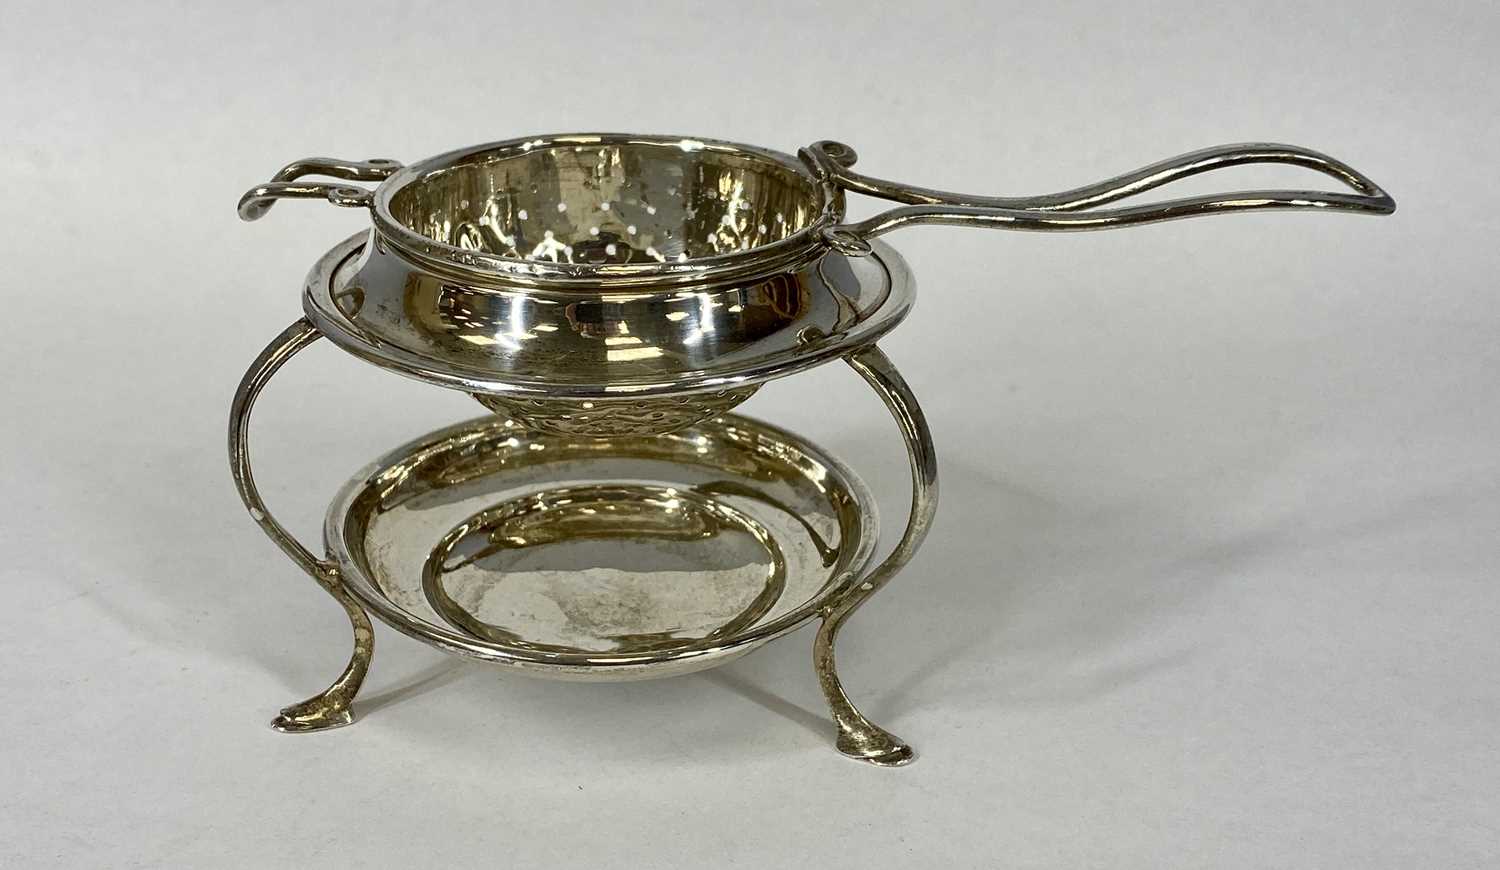 MIXED SMALL SILVER ITEMS, George V silver tea strainer and stand, Birmingham 1915, Art Nouveau - Image 3 of 7